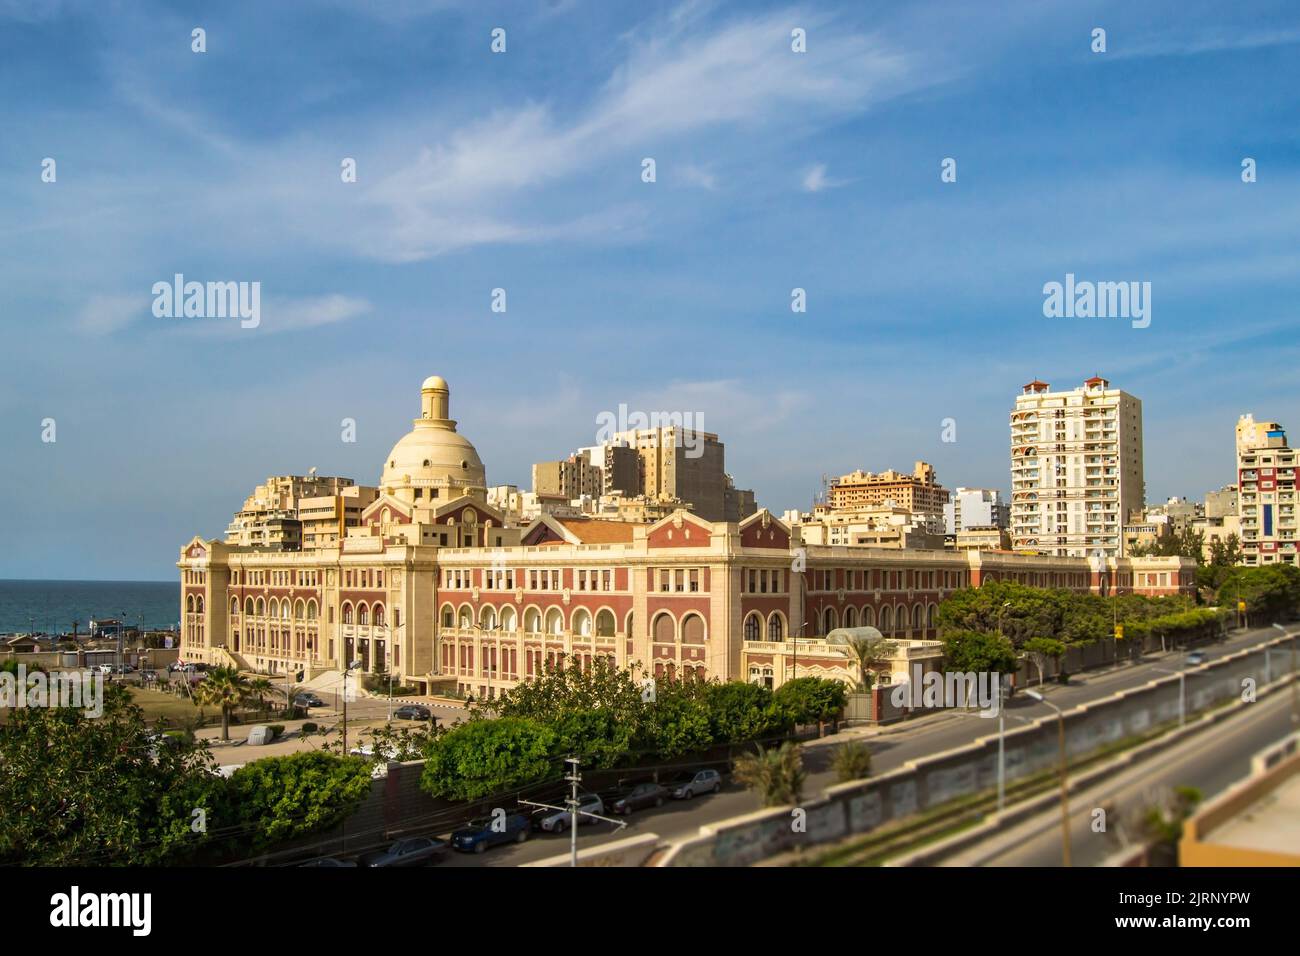 https://c8.alamy.com/comp/2JRNYPW/a-beautiful-building-of-the-college-saint-marc-in-alexandria-egypt-2JRNYPW.jpg